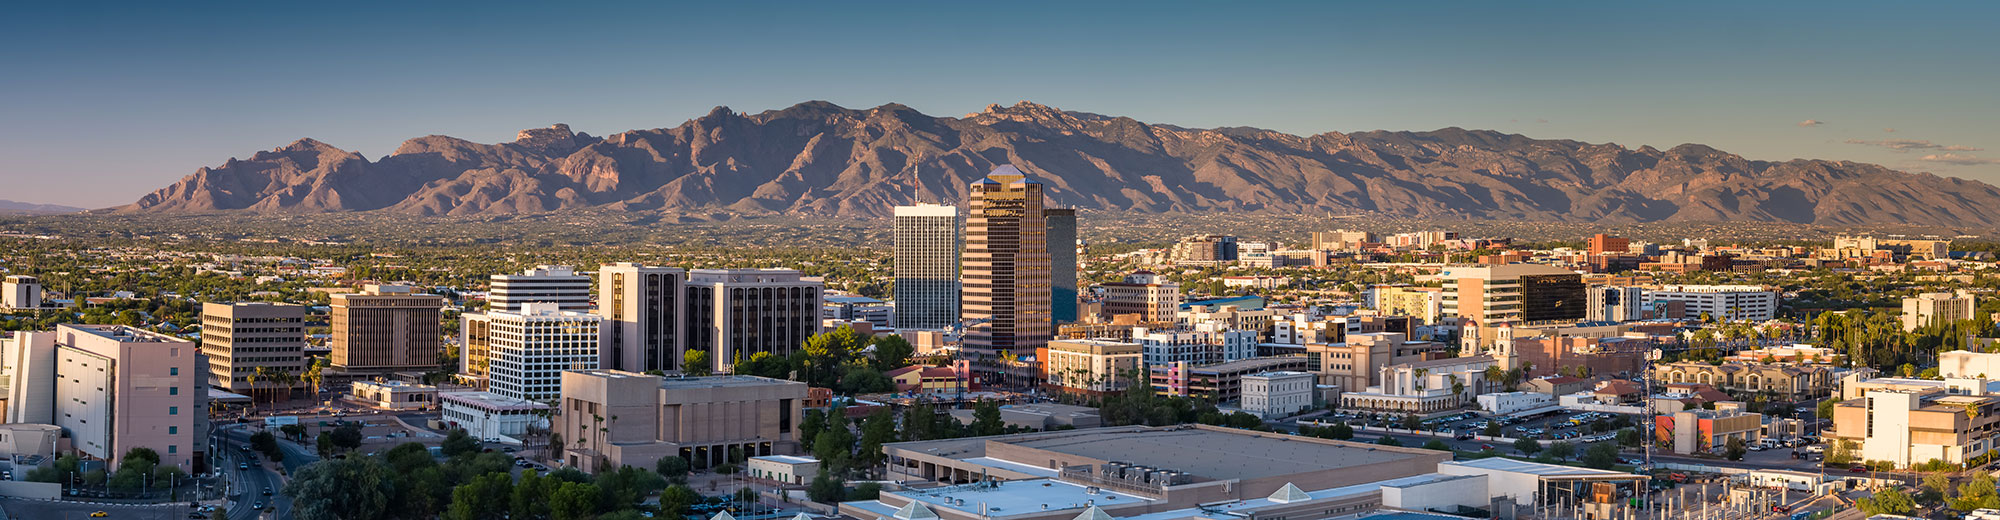 Skyline of Tucson, Arizona with downtown and mountains in background